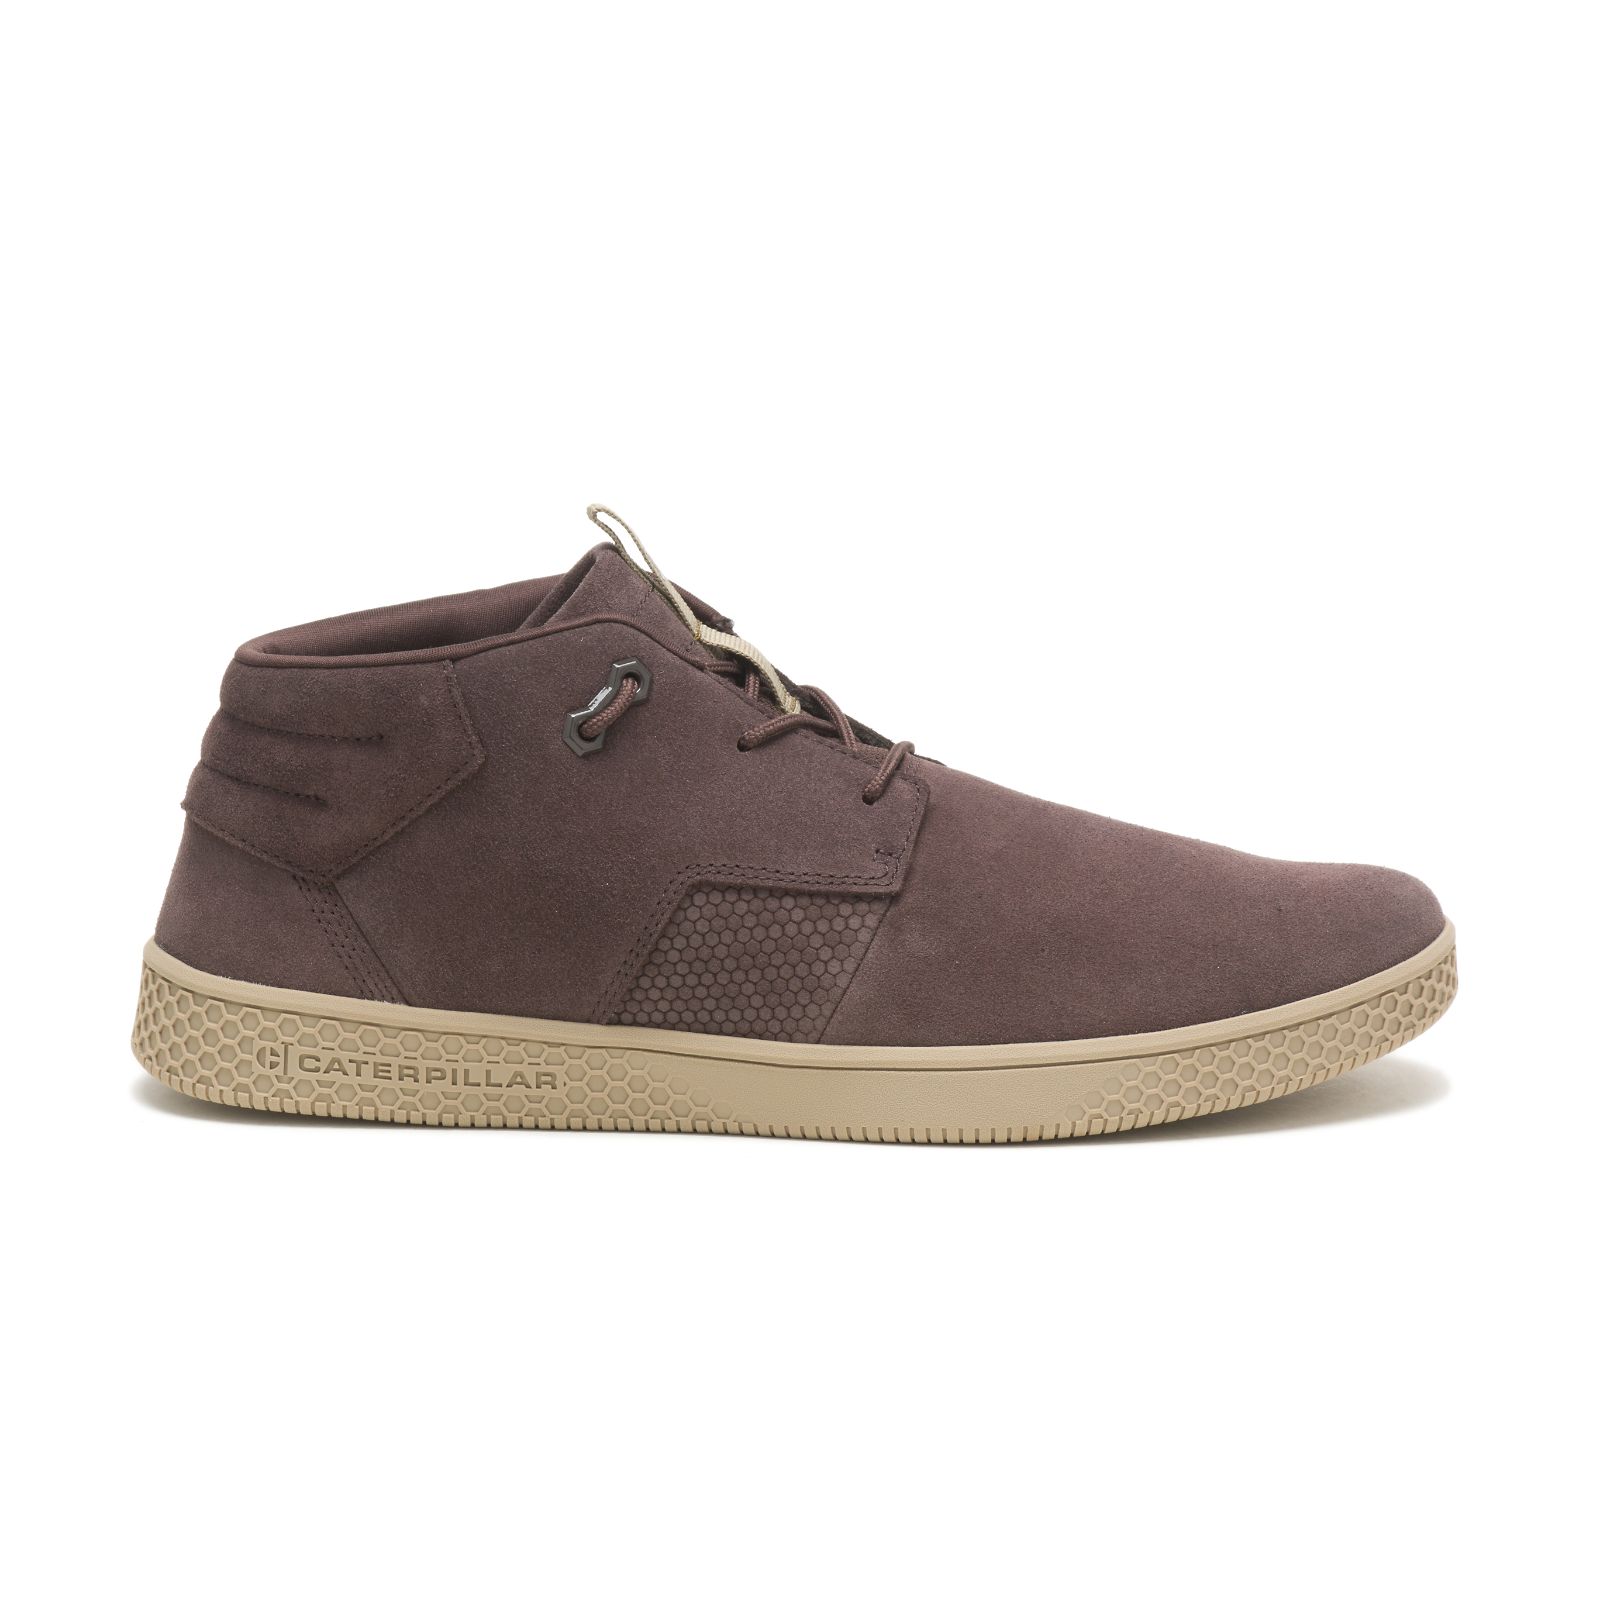 Caterpillar Code Pause Mid - Womens Sneakers - Coffee - NZ (679BAXHJQ)